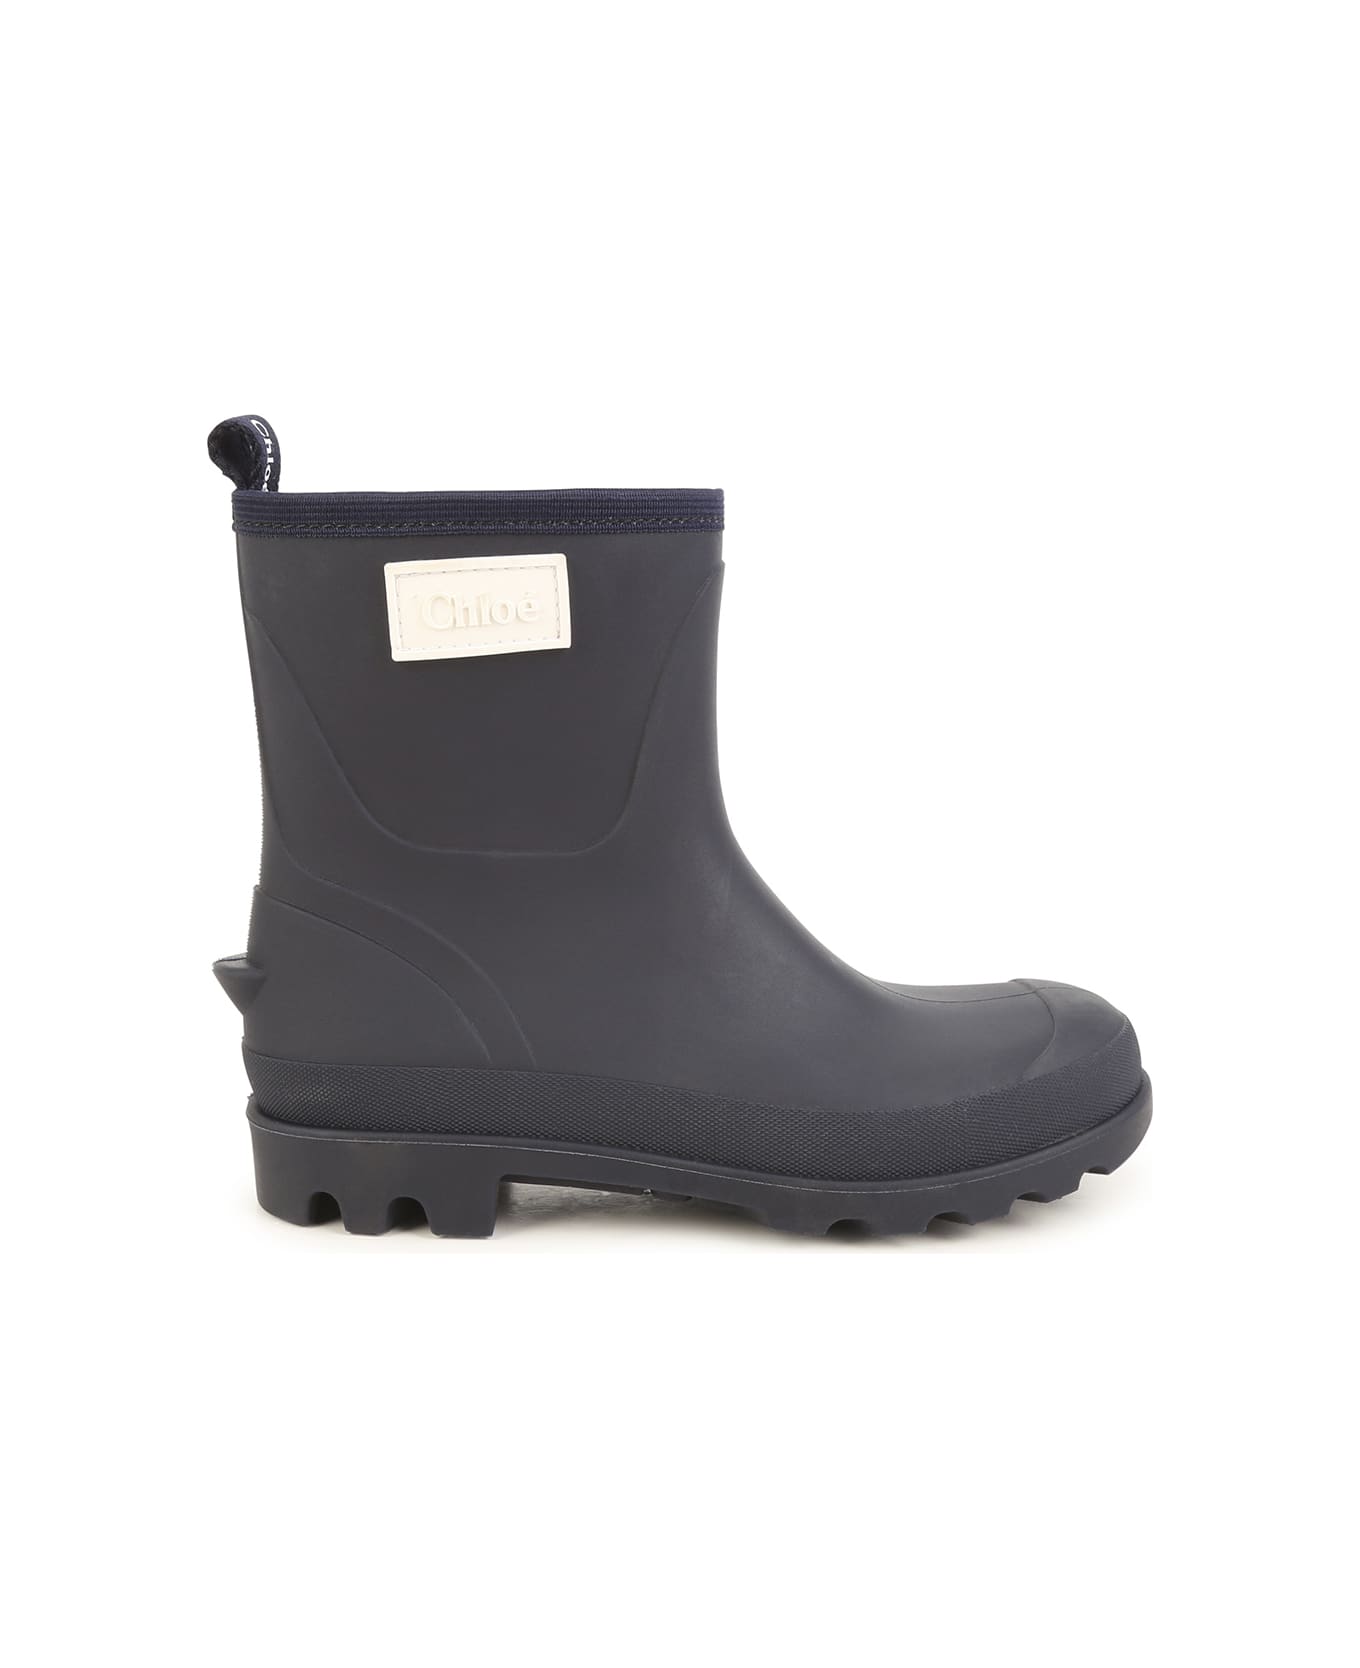 Chloé Navy Blue Rubber Ankle Boots With Logo Patch - Blu